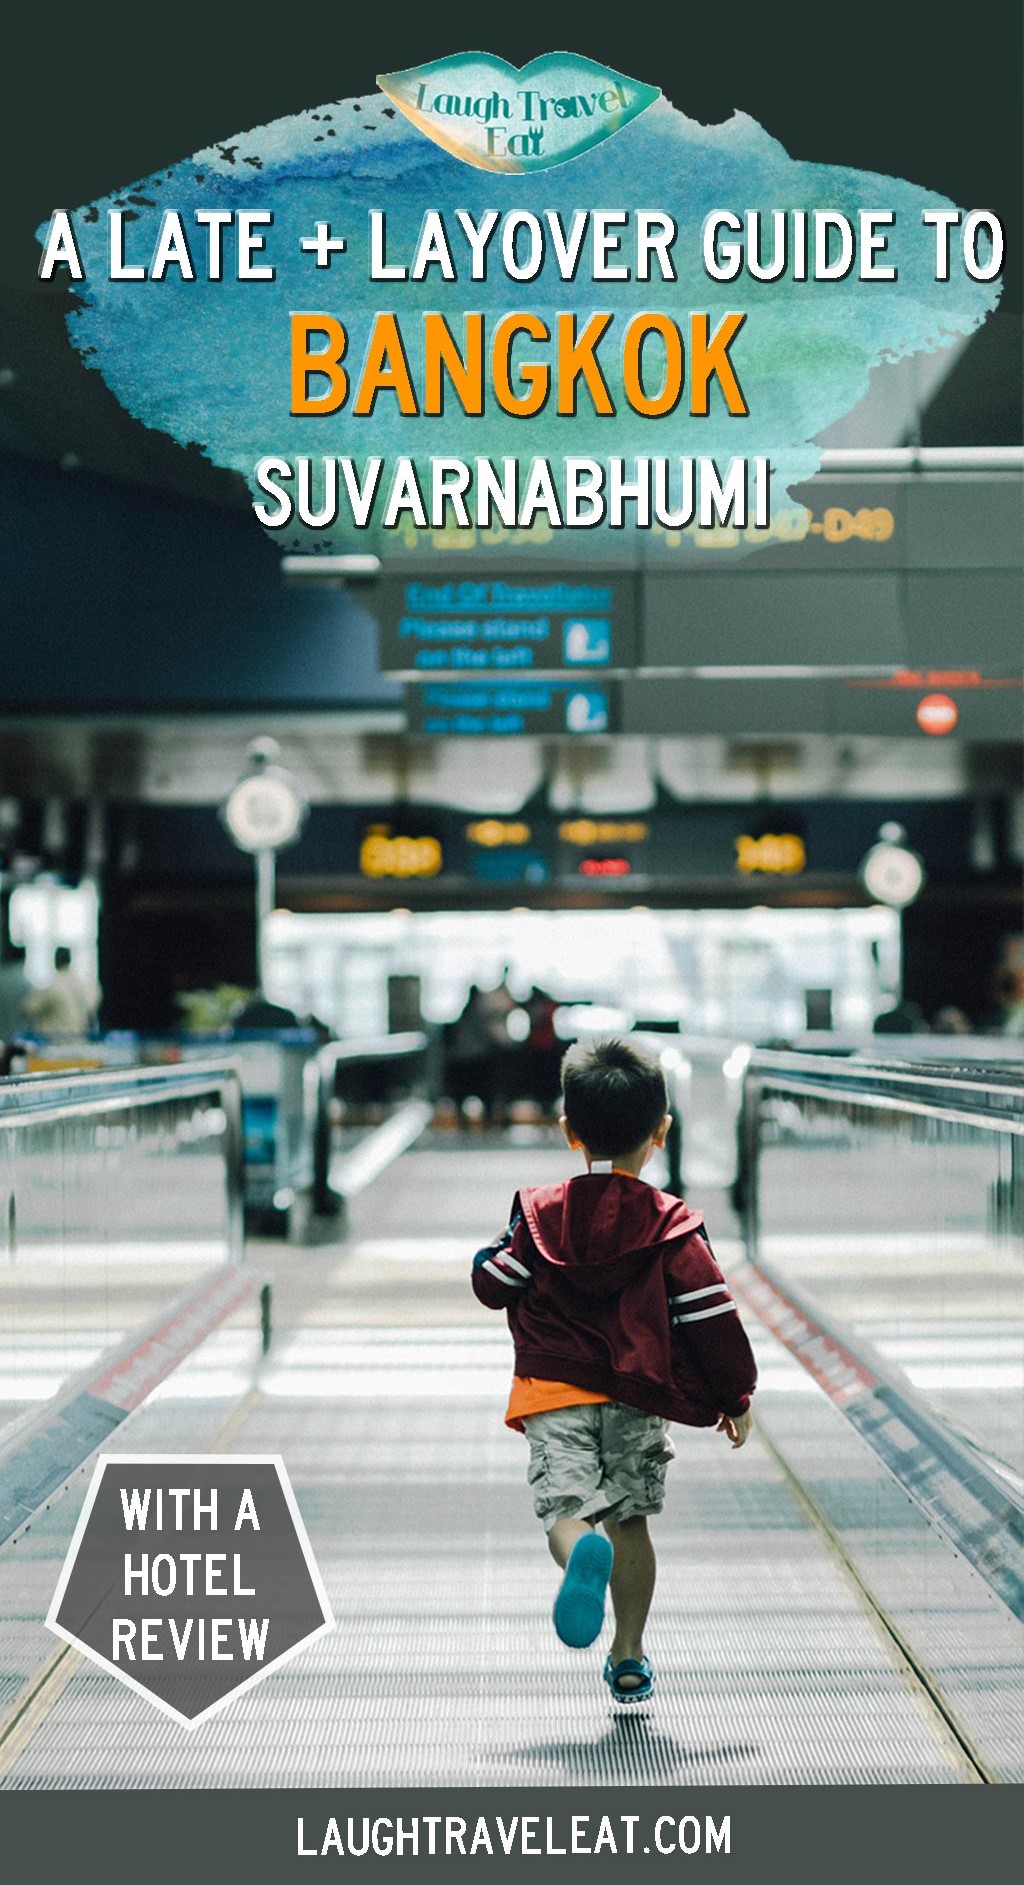 Are you arriving late, early, or need to do a layover at Bangkok Suvarnabhumi Airport? Here's a guide on transport and hotel recommendations #Suvarnabhumi #layover #bangkok #airoprt